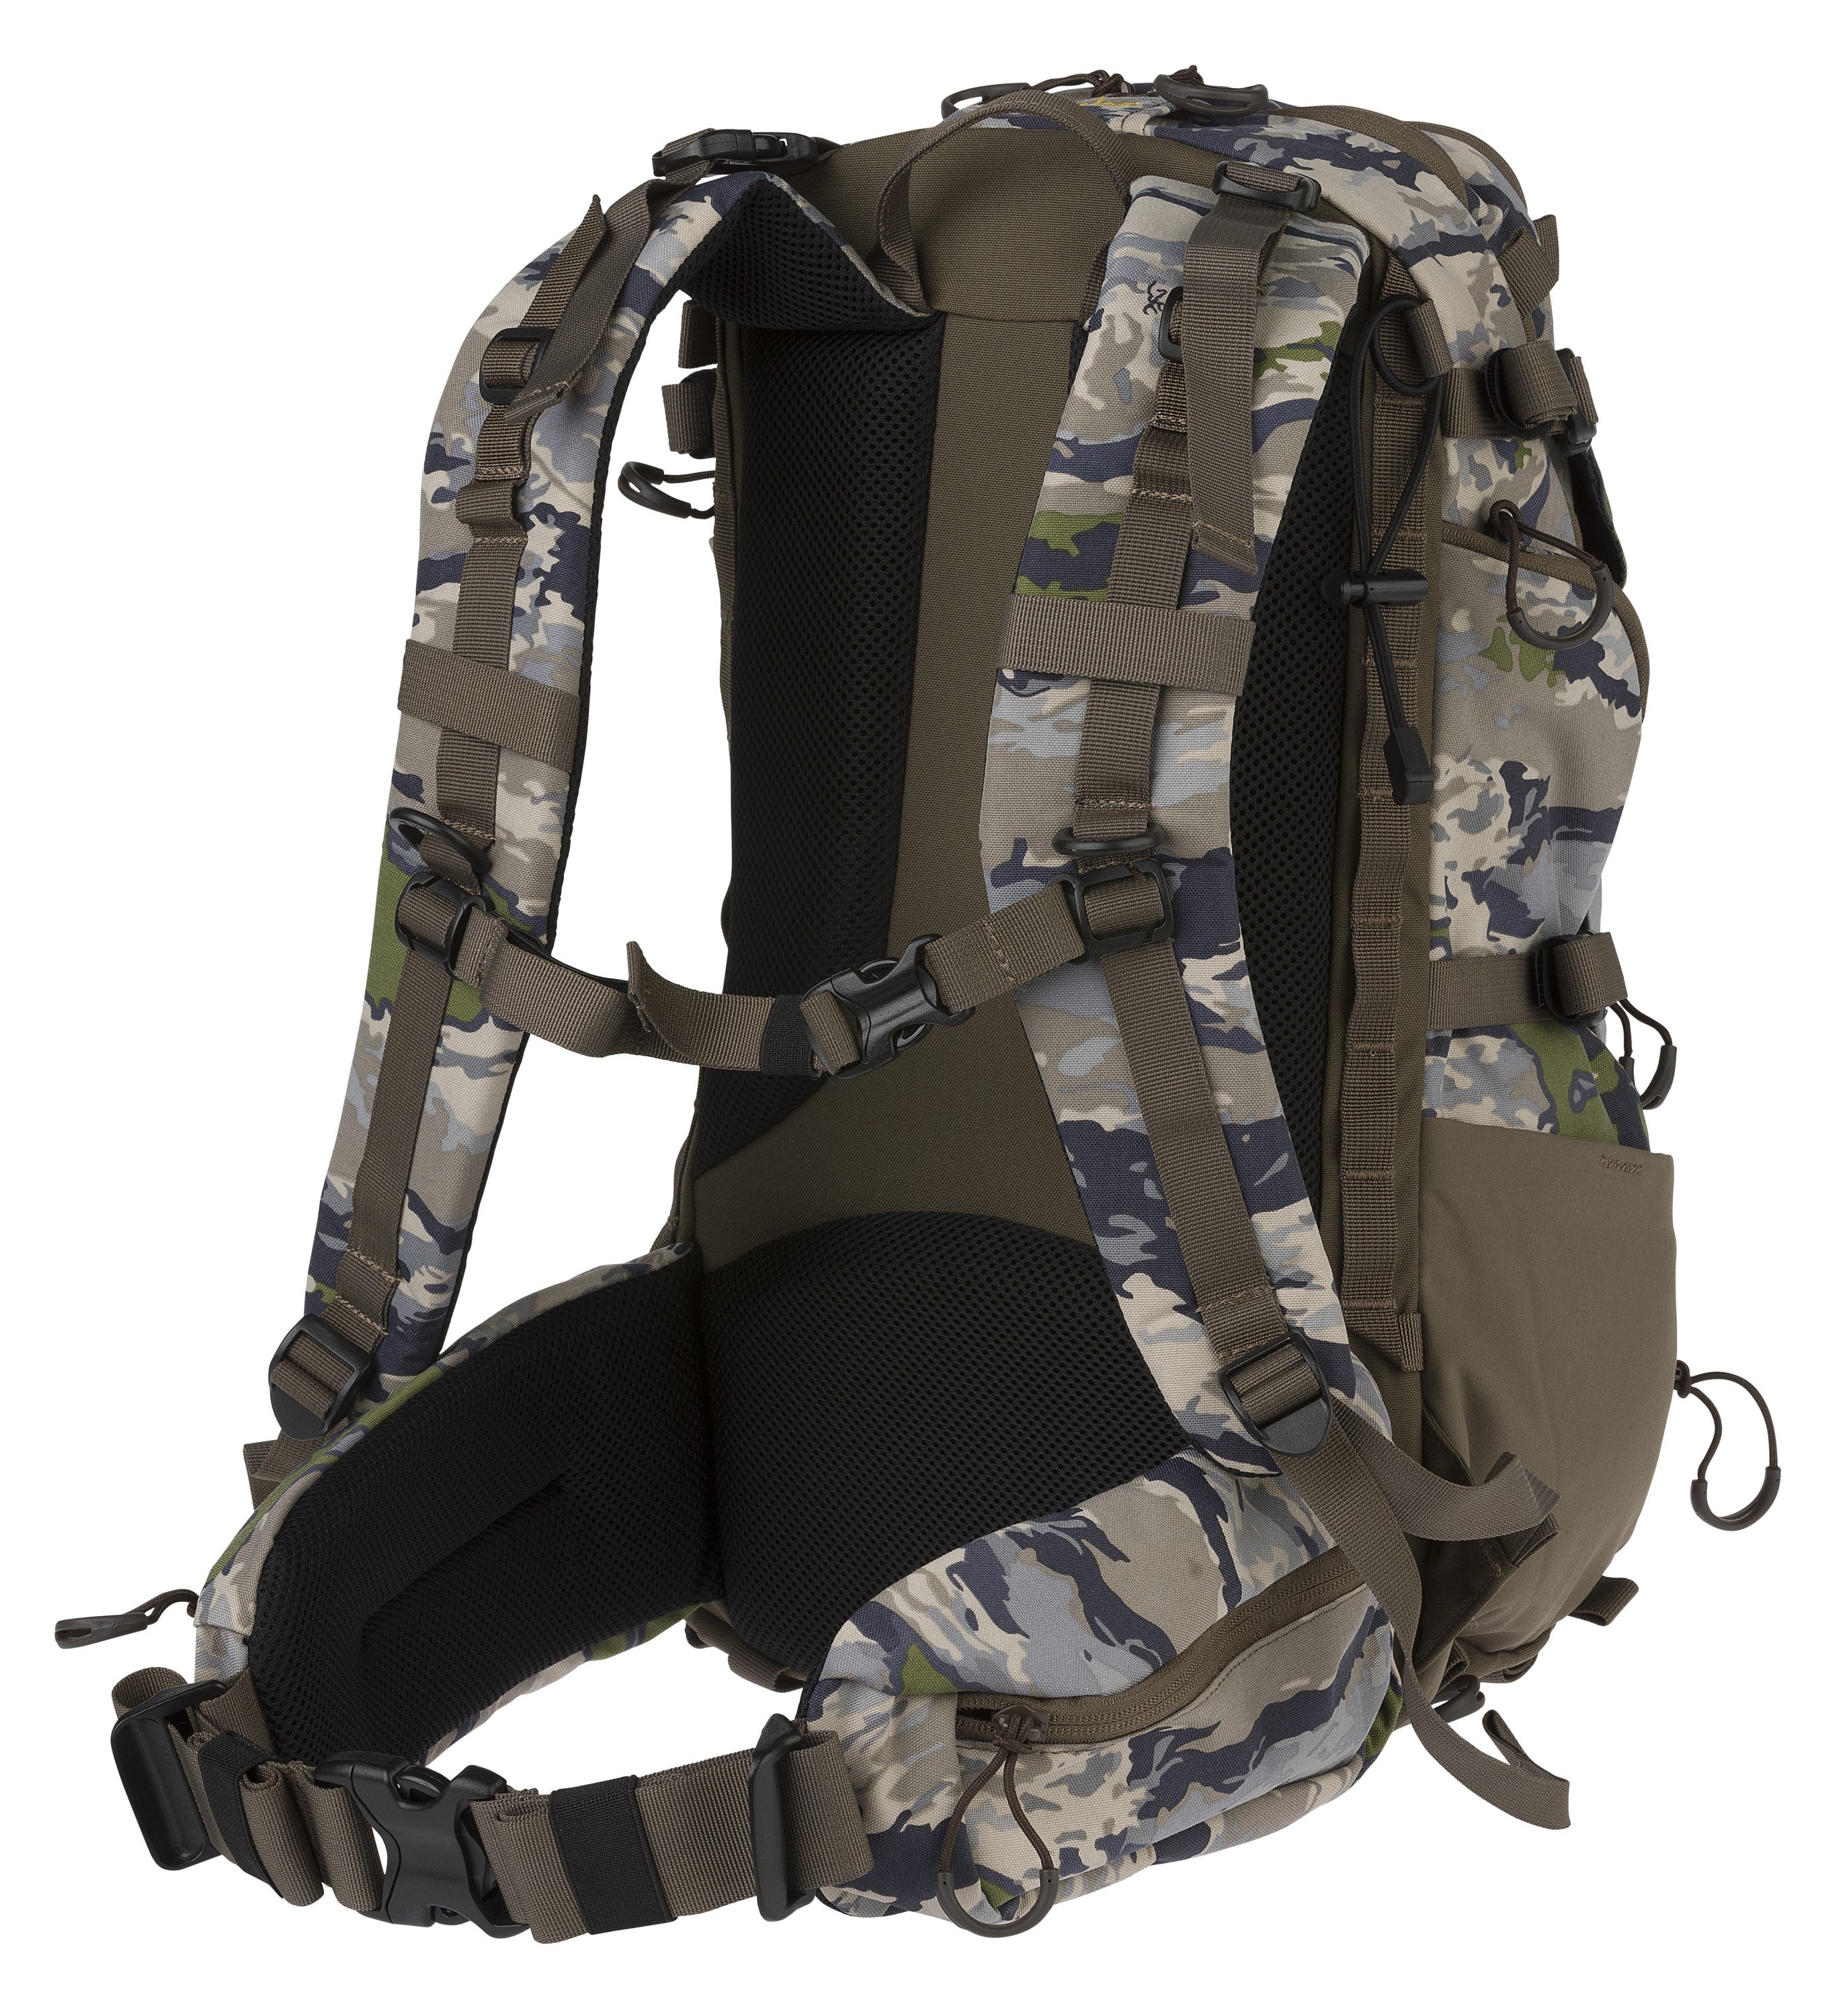 Whitetail 1900 Hunting Pack